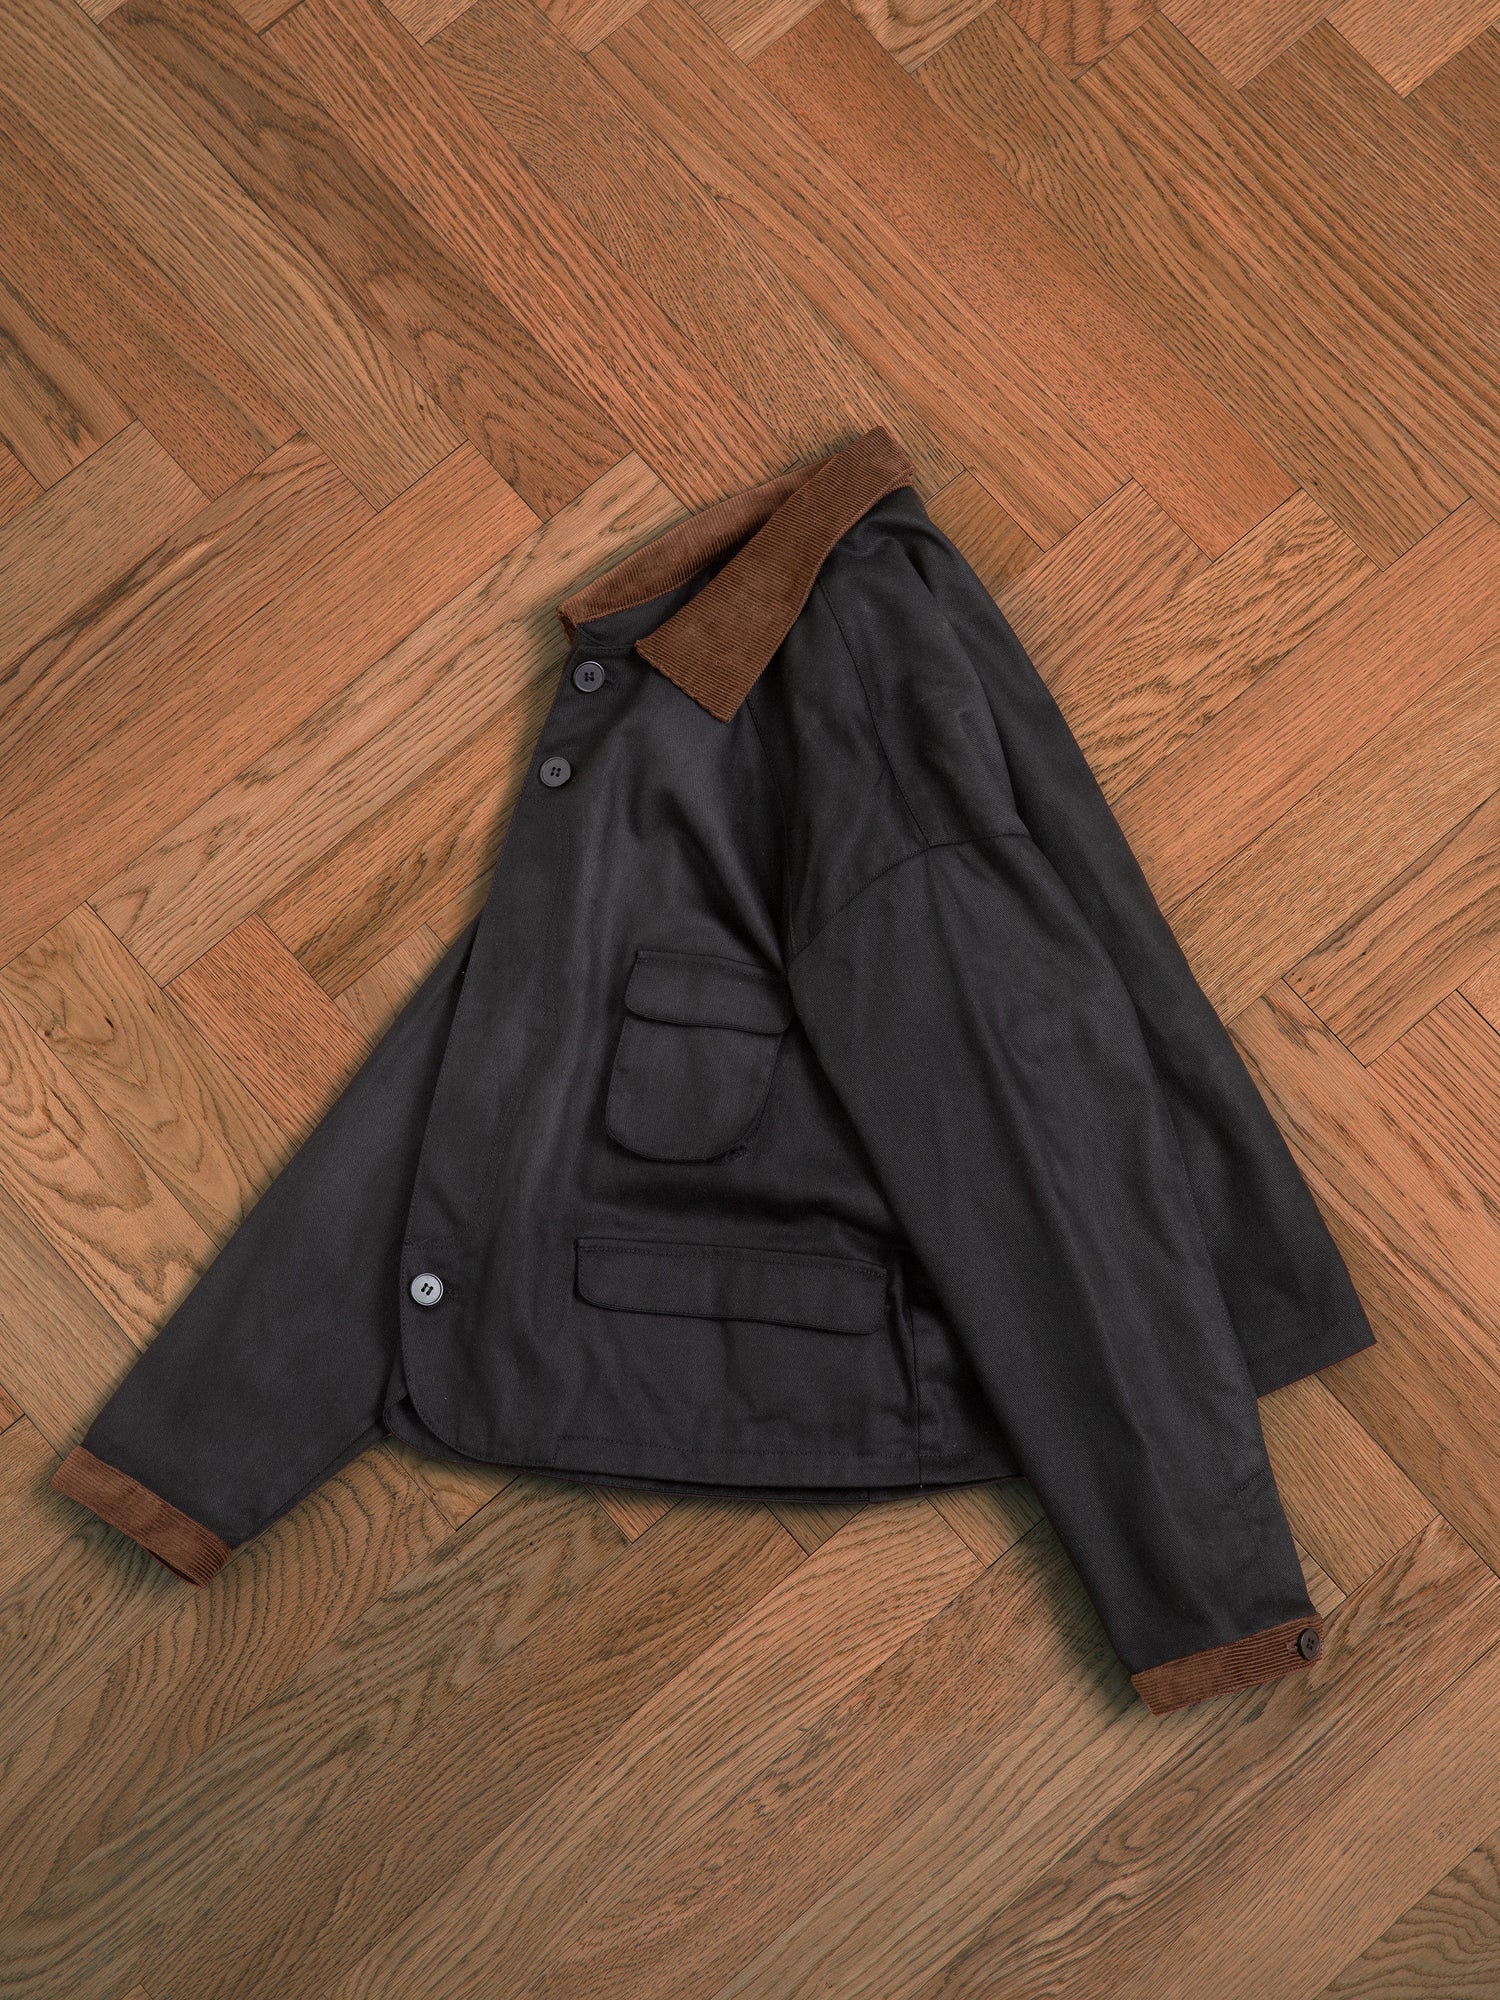 A black Lar Waxed Cotton Box Coat laying on a wooden floor by Found.